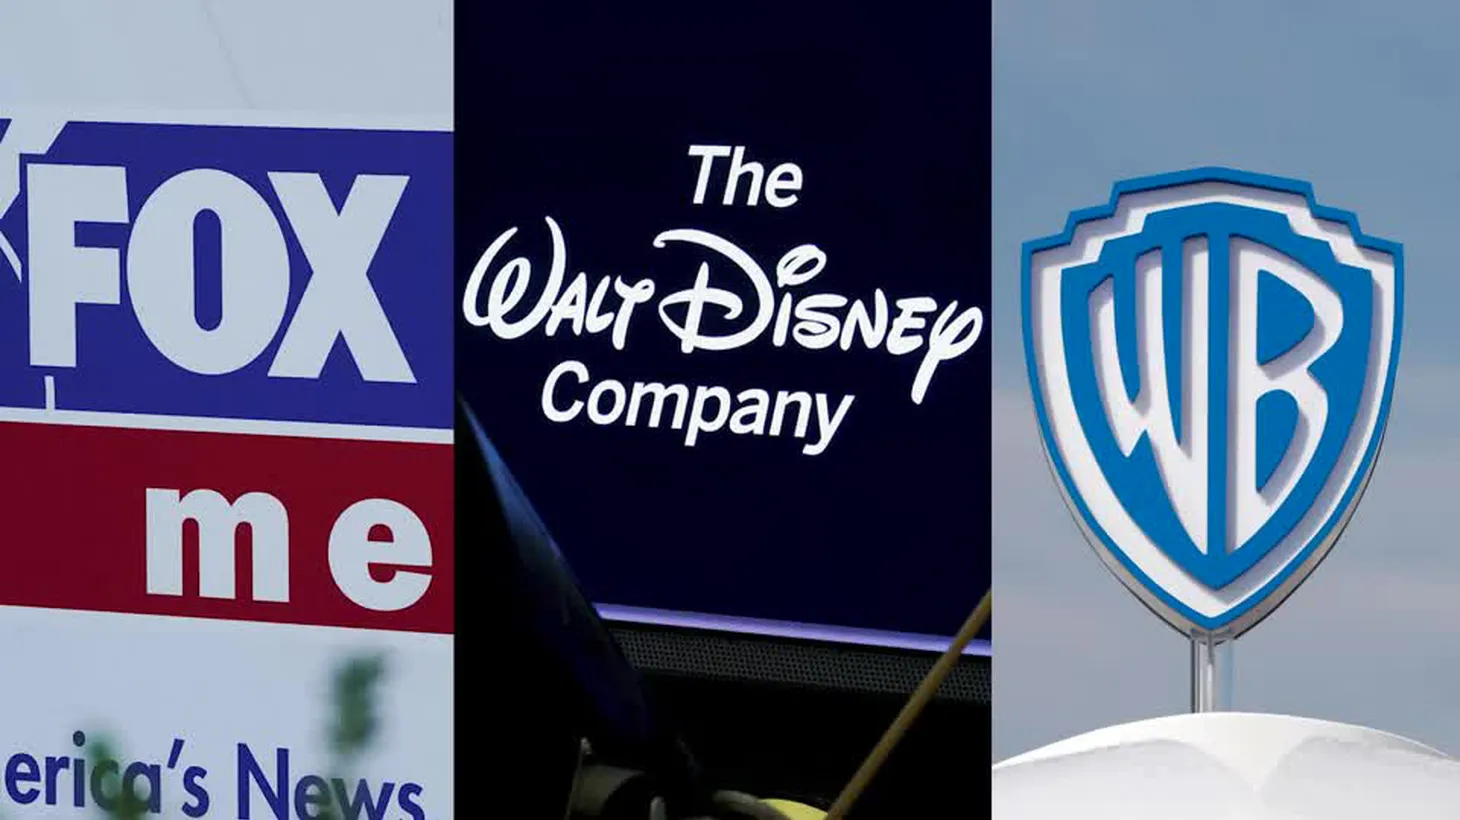 Fox, Walt Disney and Warner Bros Discovery said on Tuesday they will launch a sports streaming service later this autumn to capture younger viewers who are not tuned in to television.